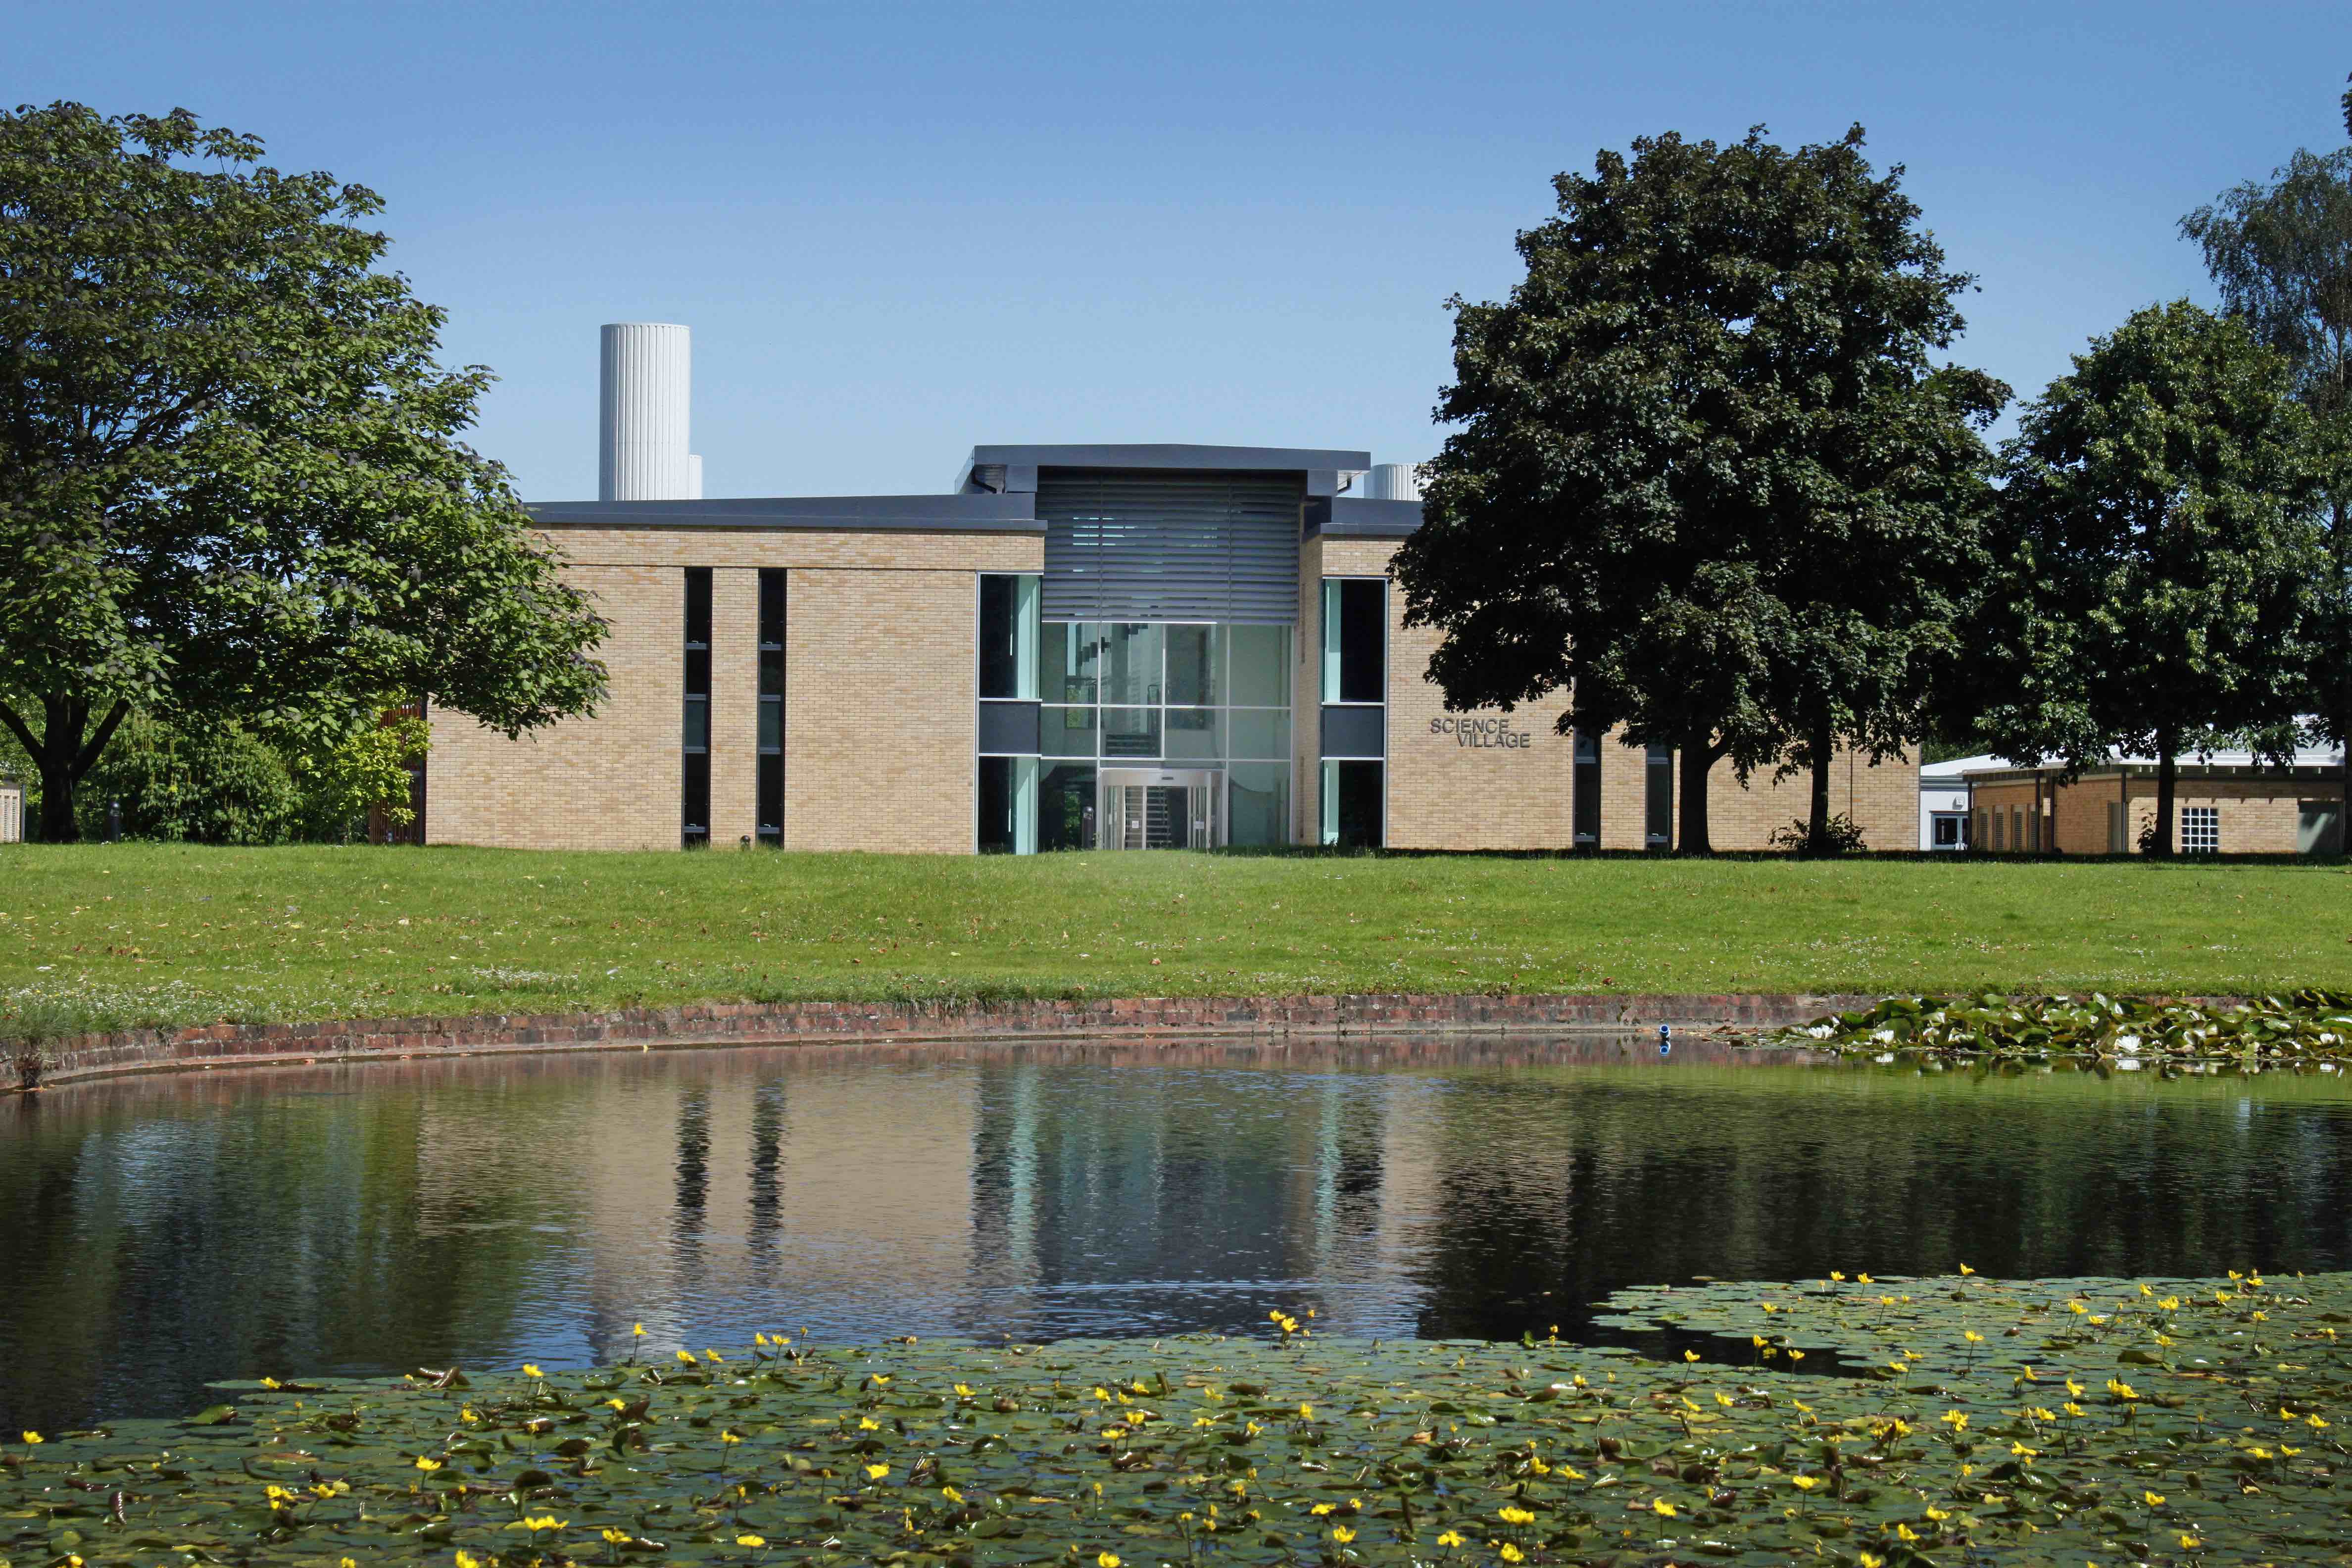 The Science Village lab building at Chesterford Research Park, Cambridge, UK